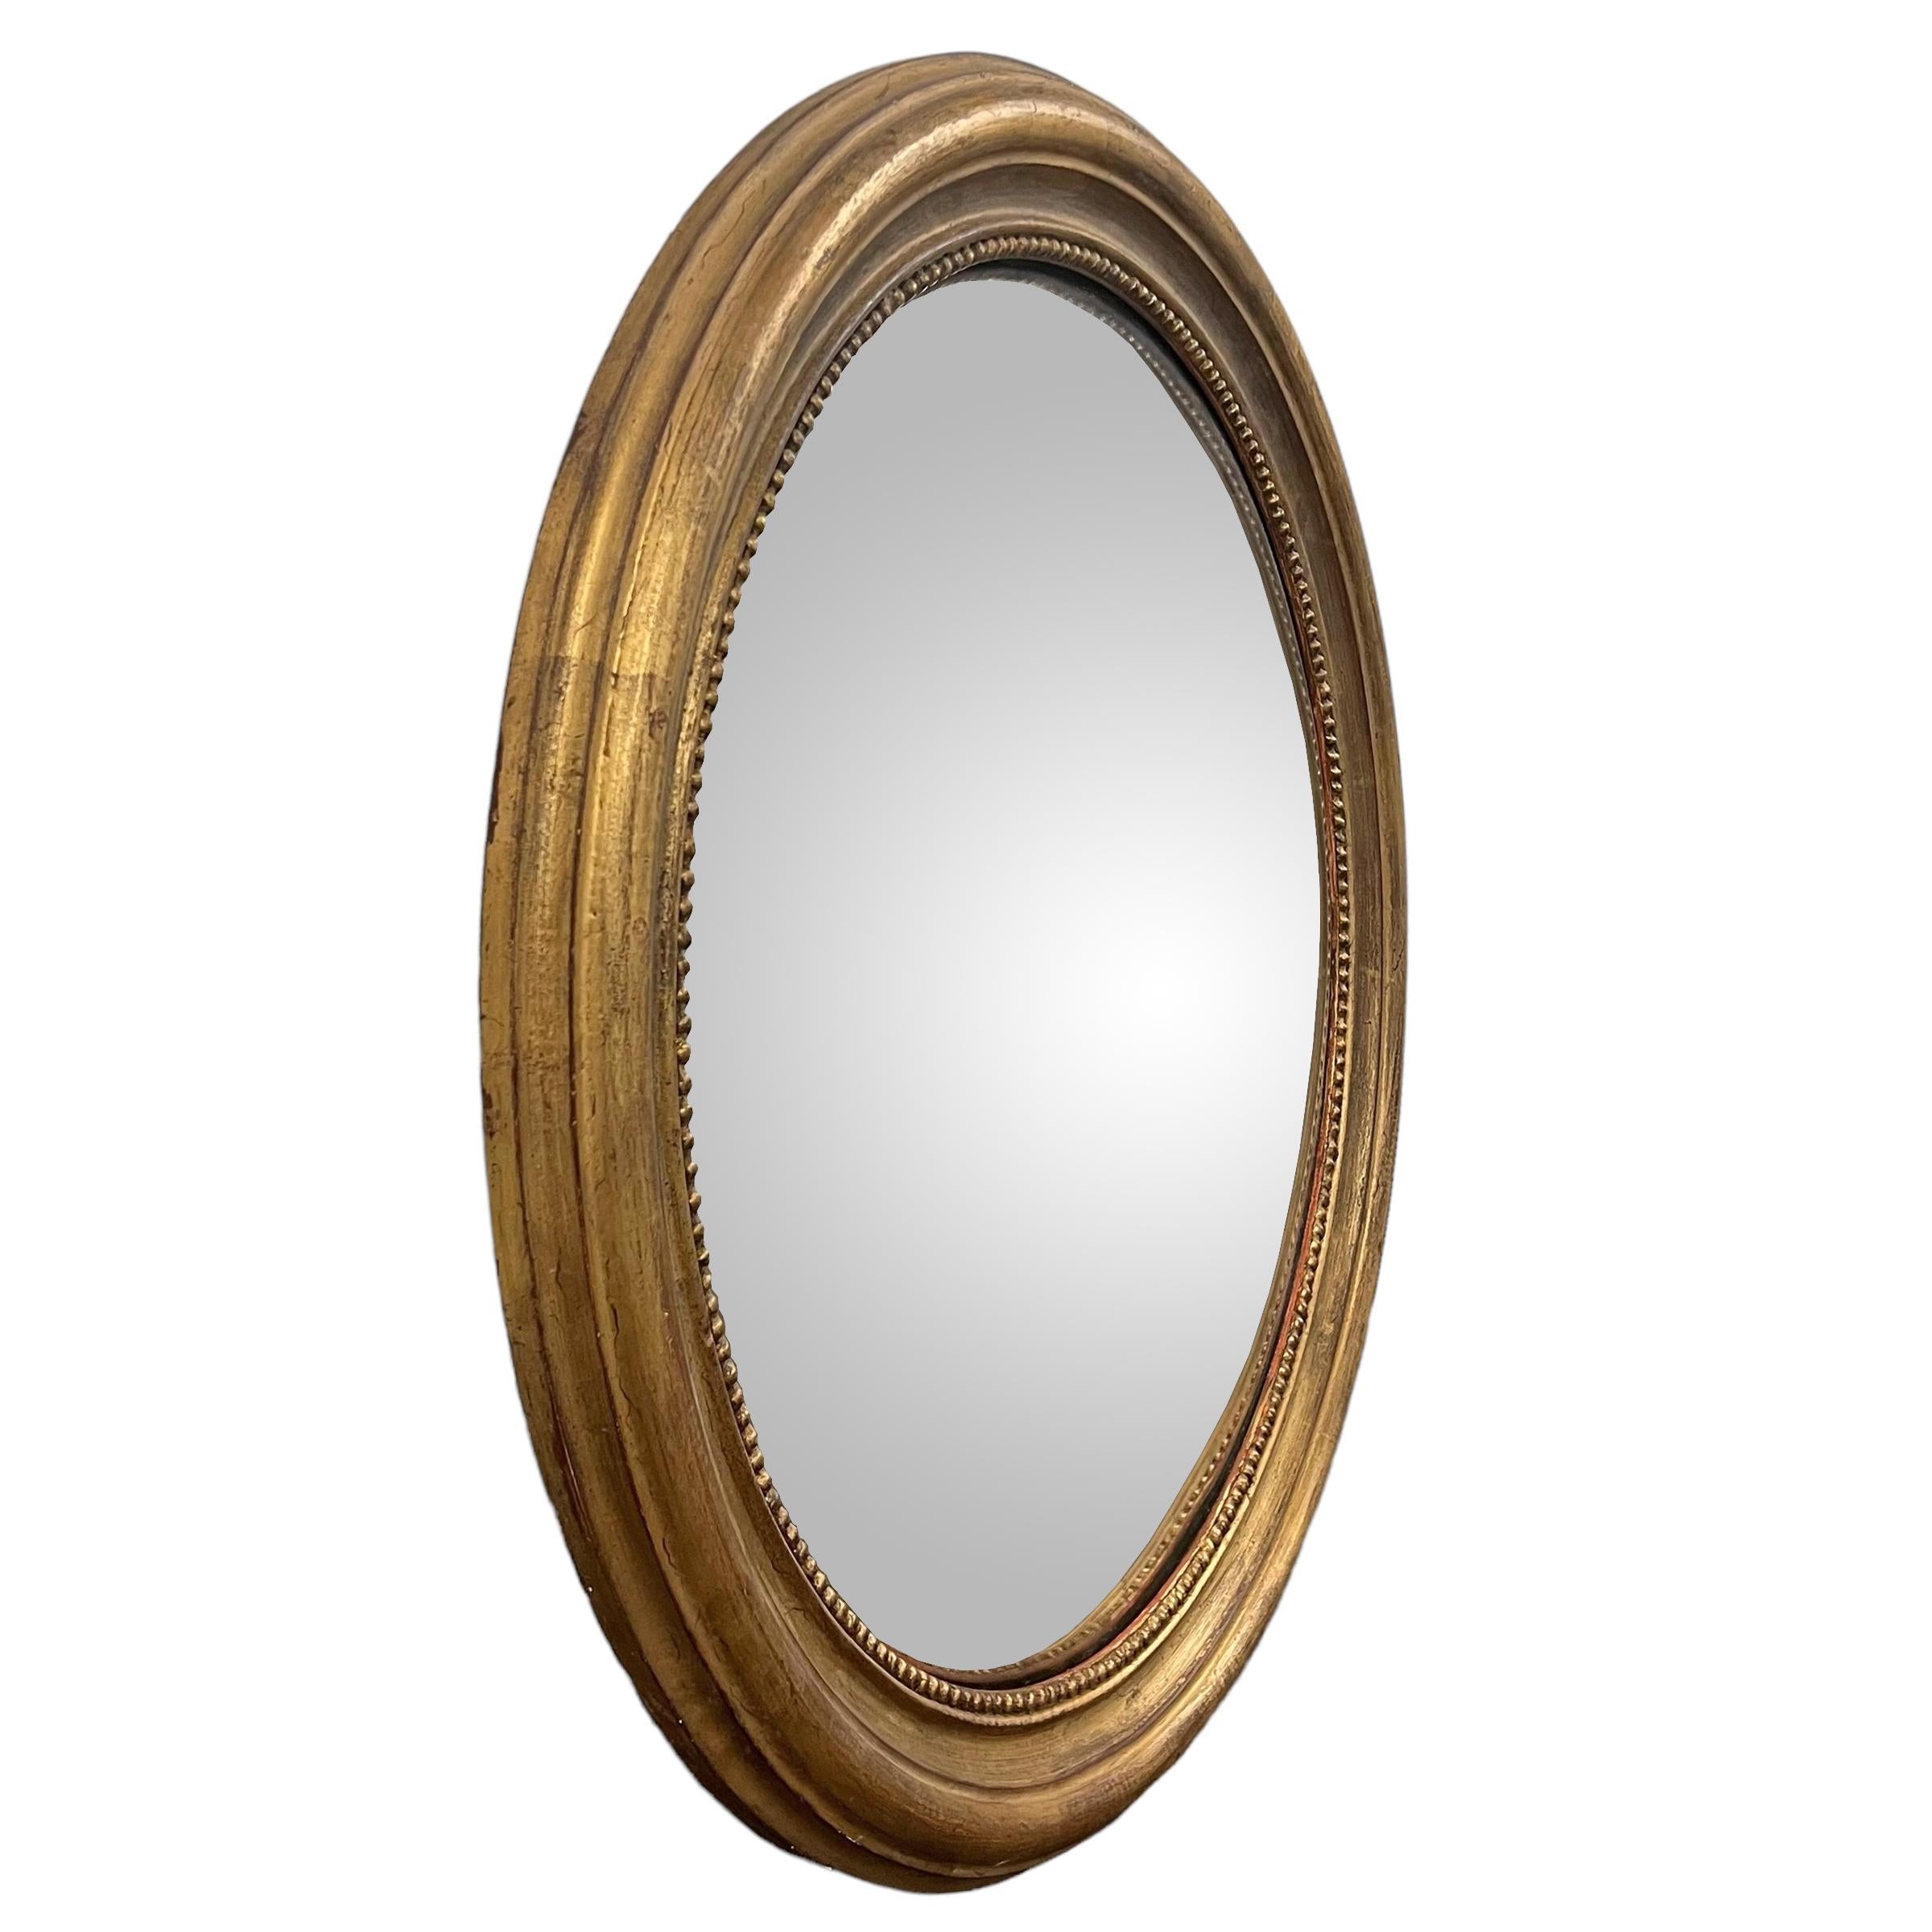 Neoclassical Mid-20th Century Giltwood Framed Convex Mirror For Sale